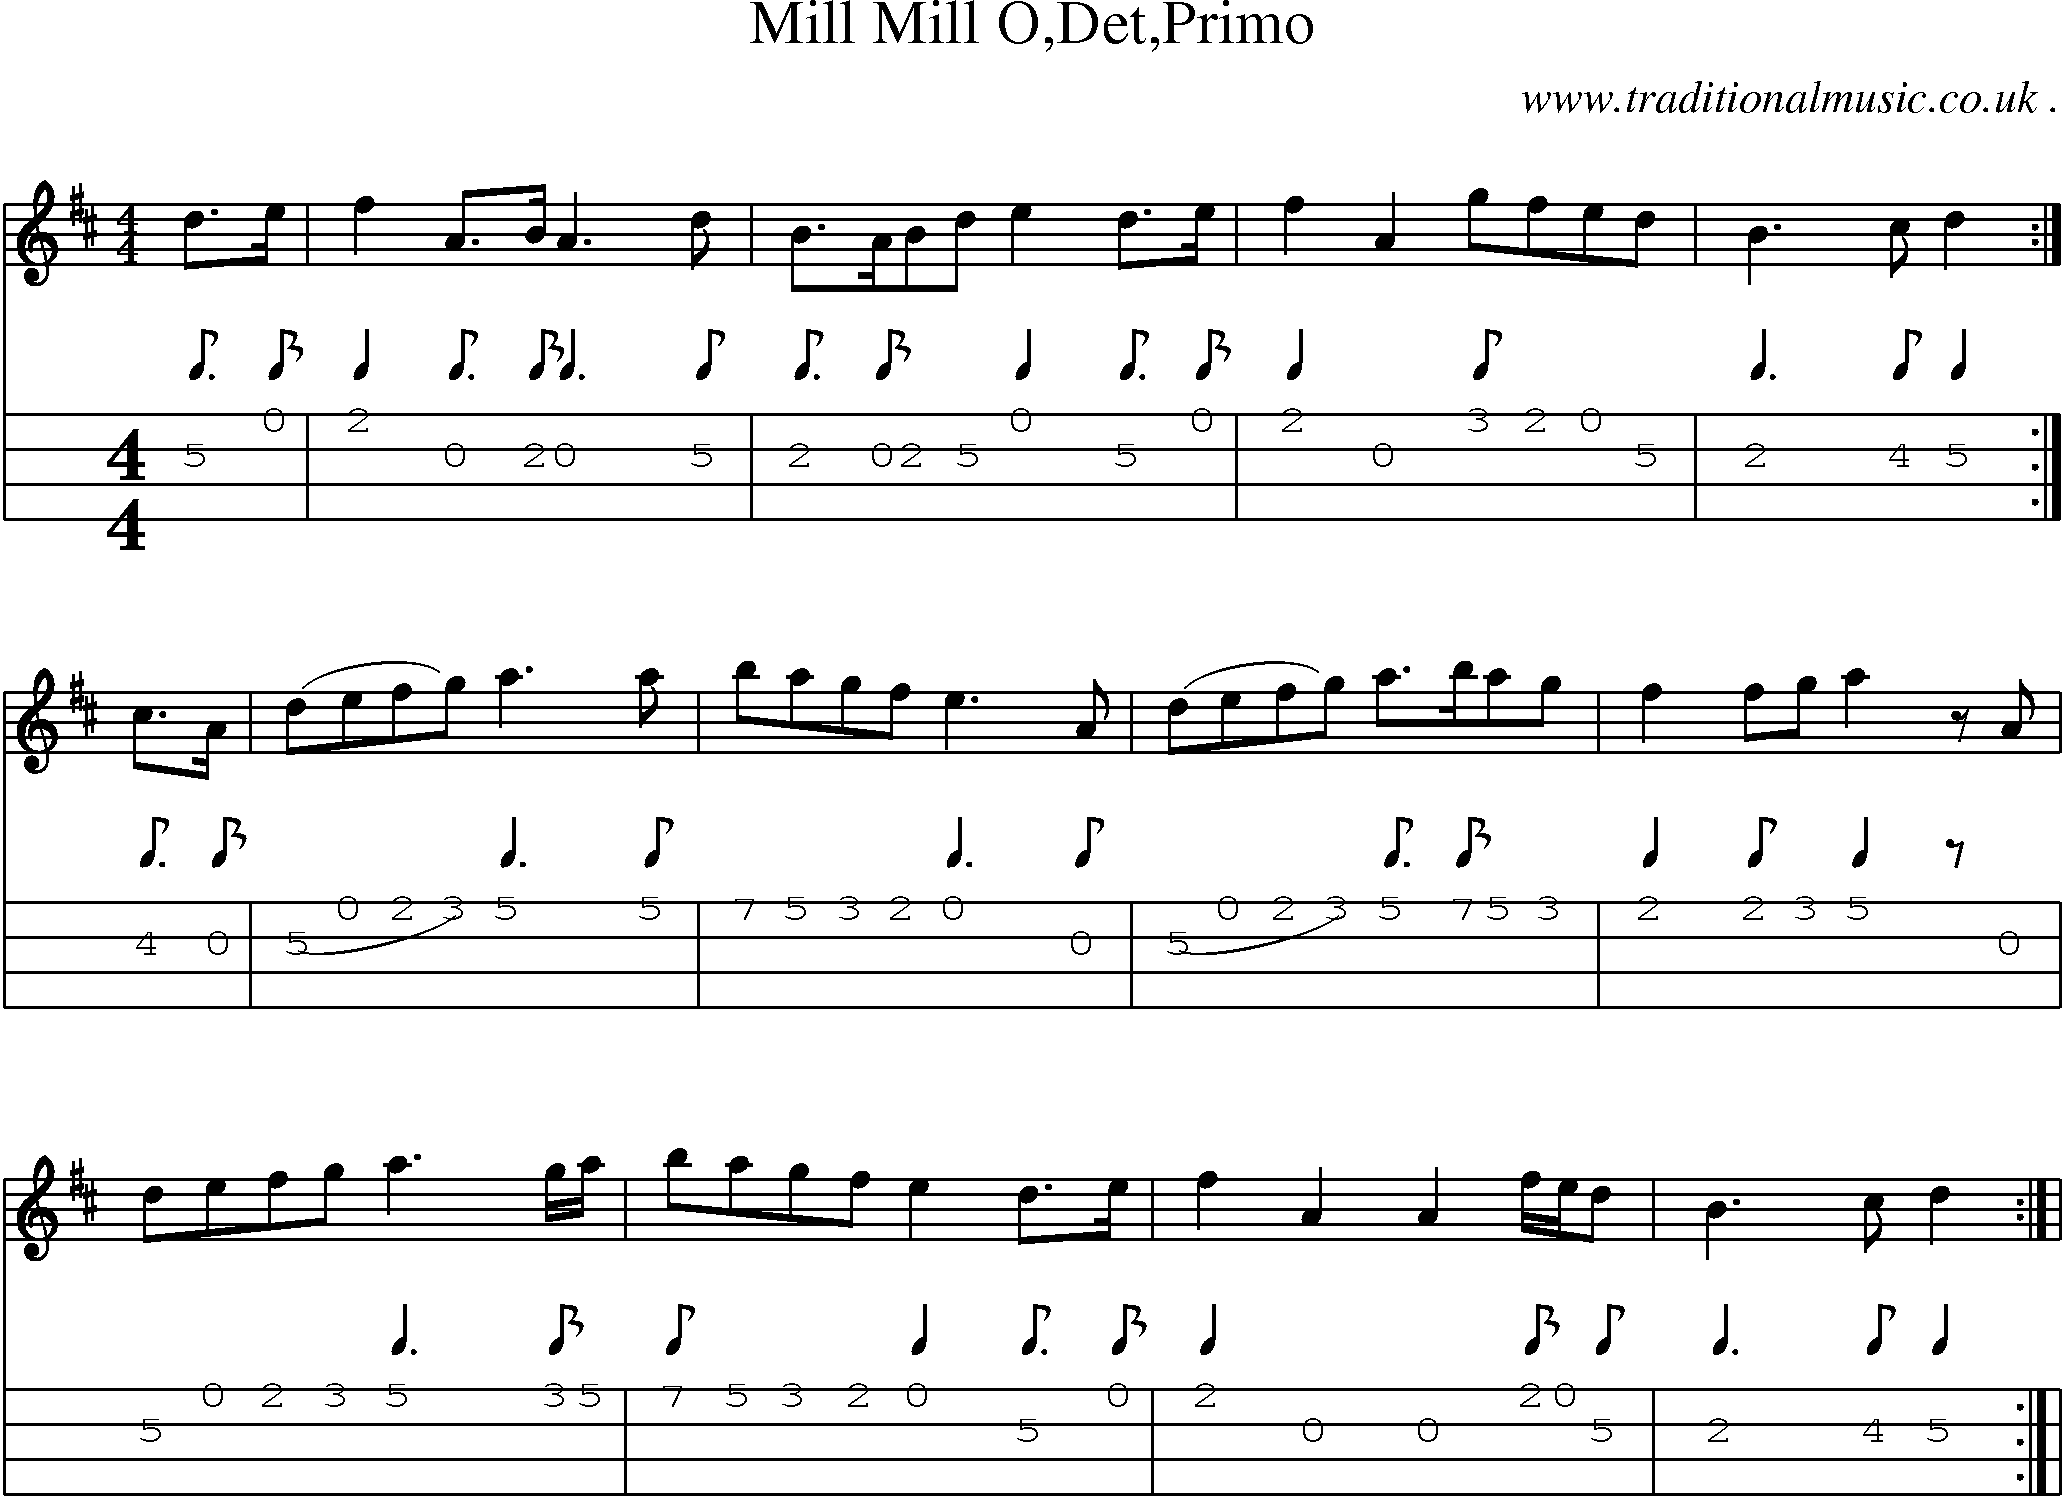 Sheet-Music and Mandolin Tabs for Mill Mill Odetprimo